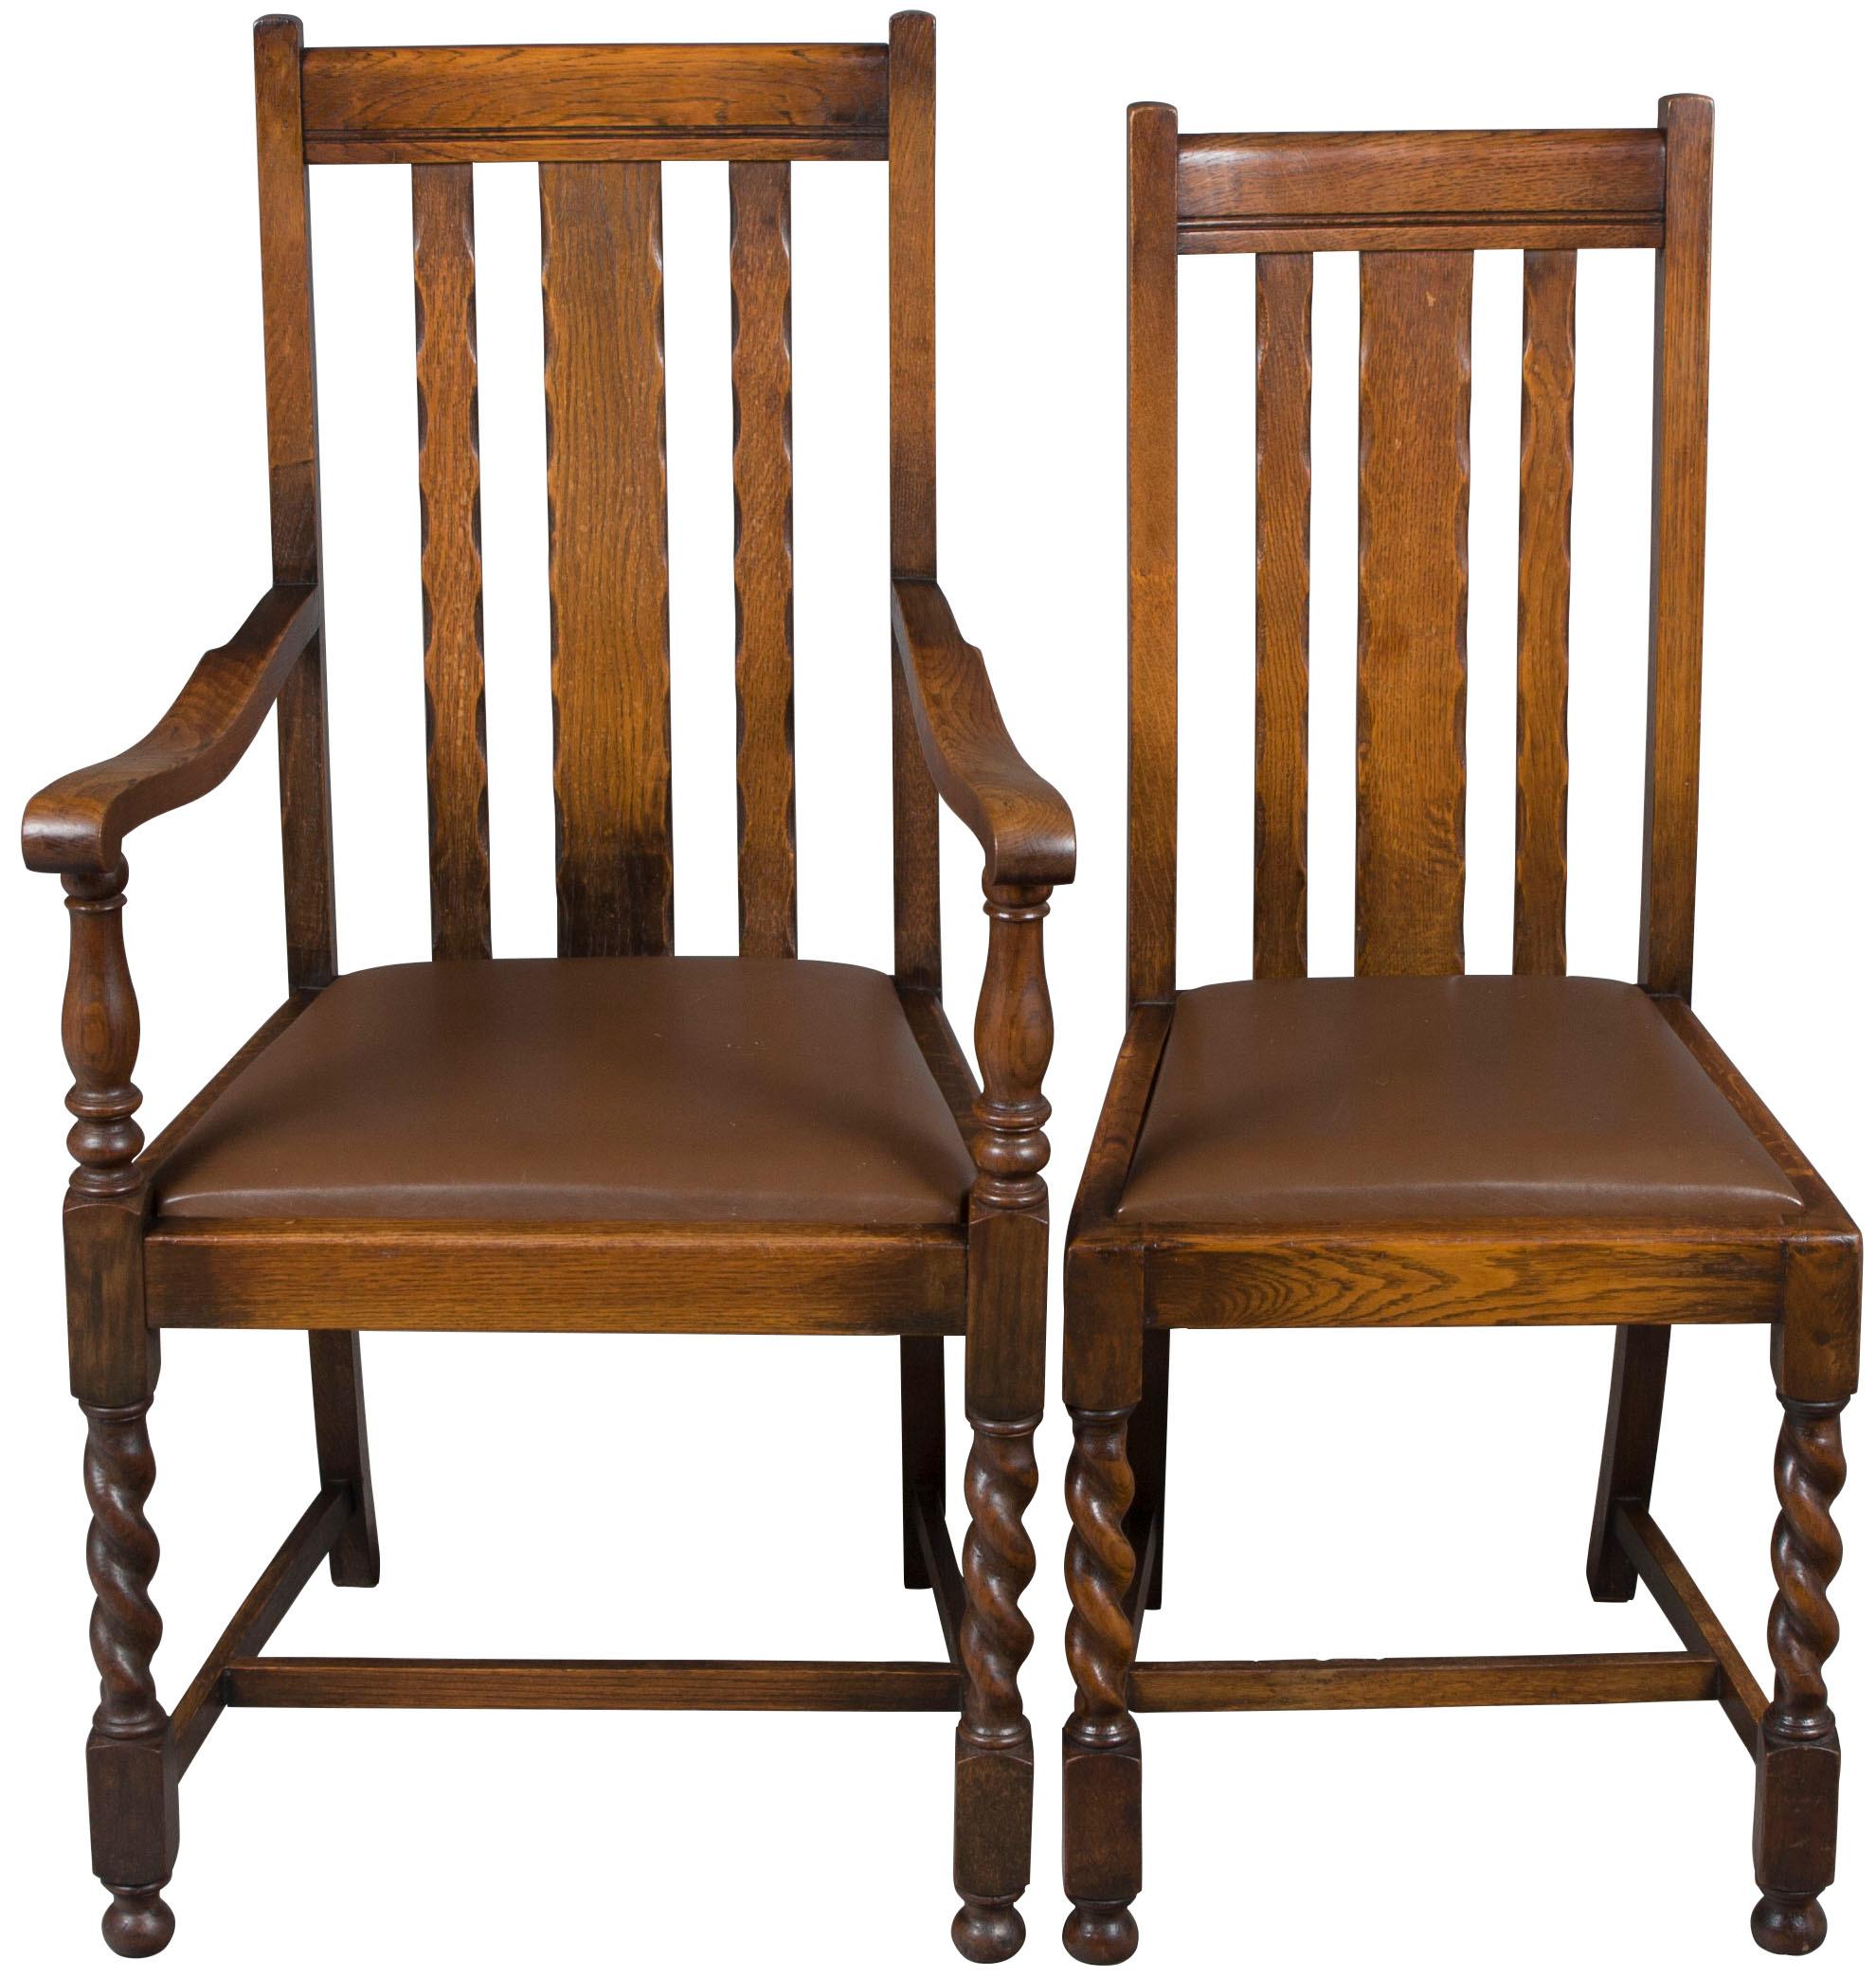 A traditional set of four English oak antique barley twist dining chairs. This set consists of 3 side chairs and an armchair. All four were made with barley twist front legs and currently have brown leather upholstered seats. The upholstery looks